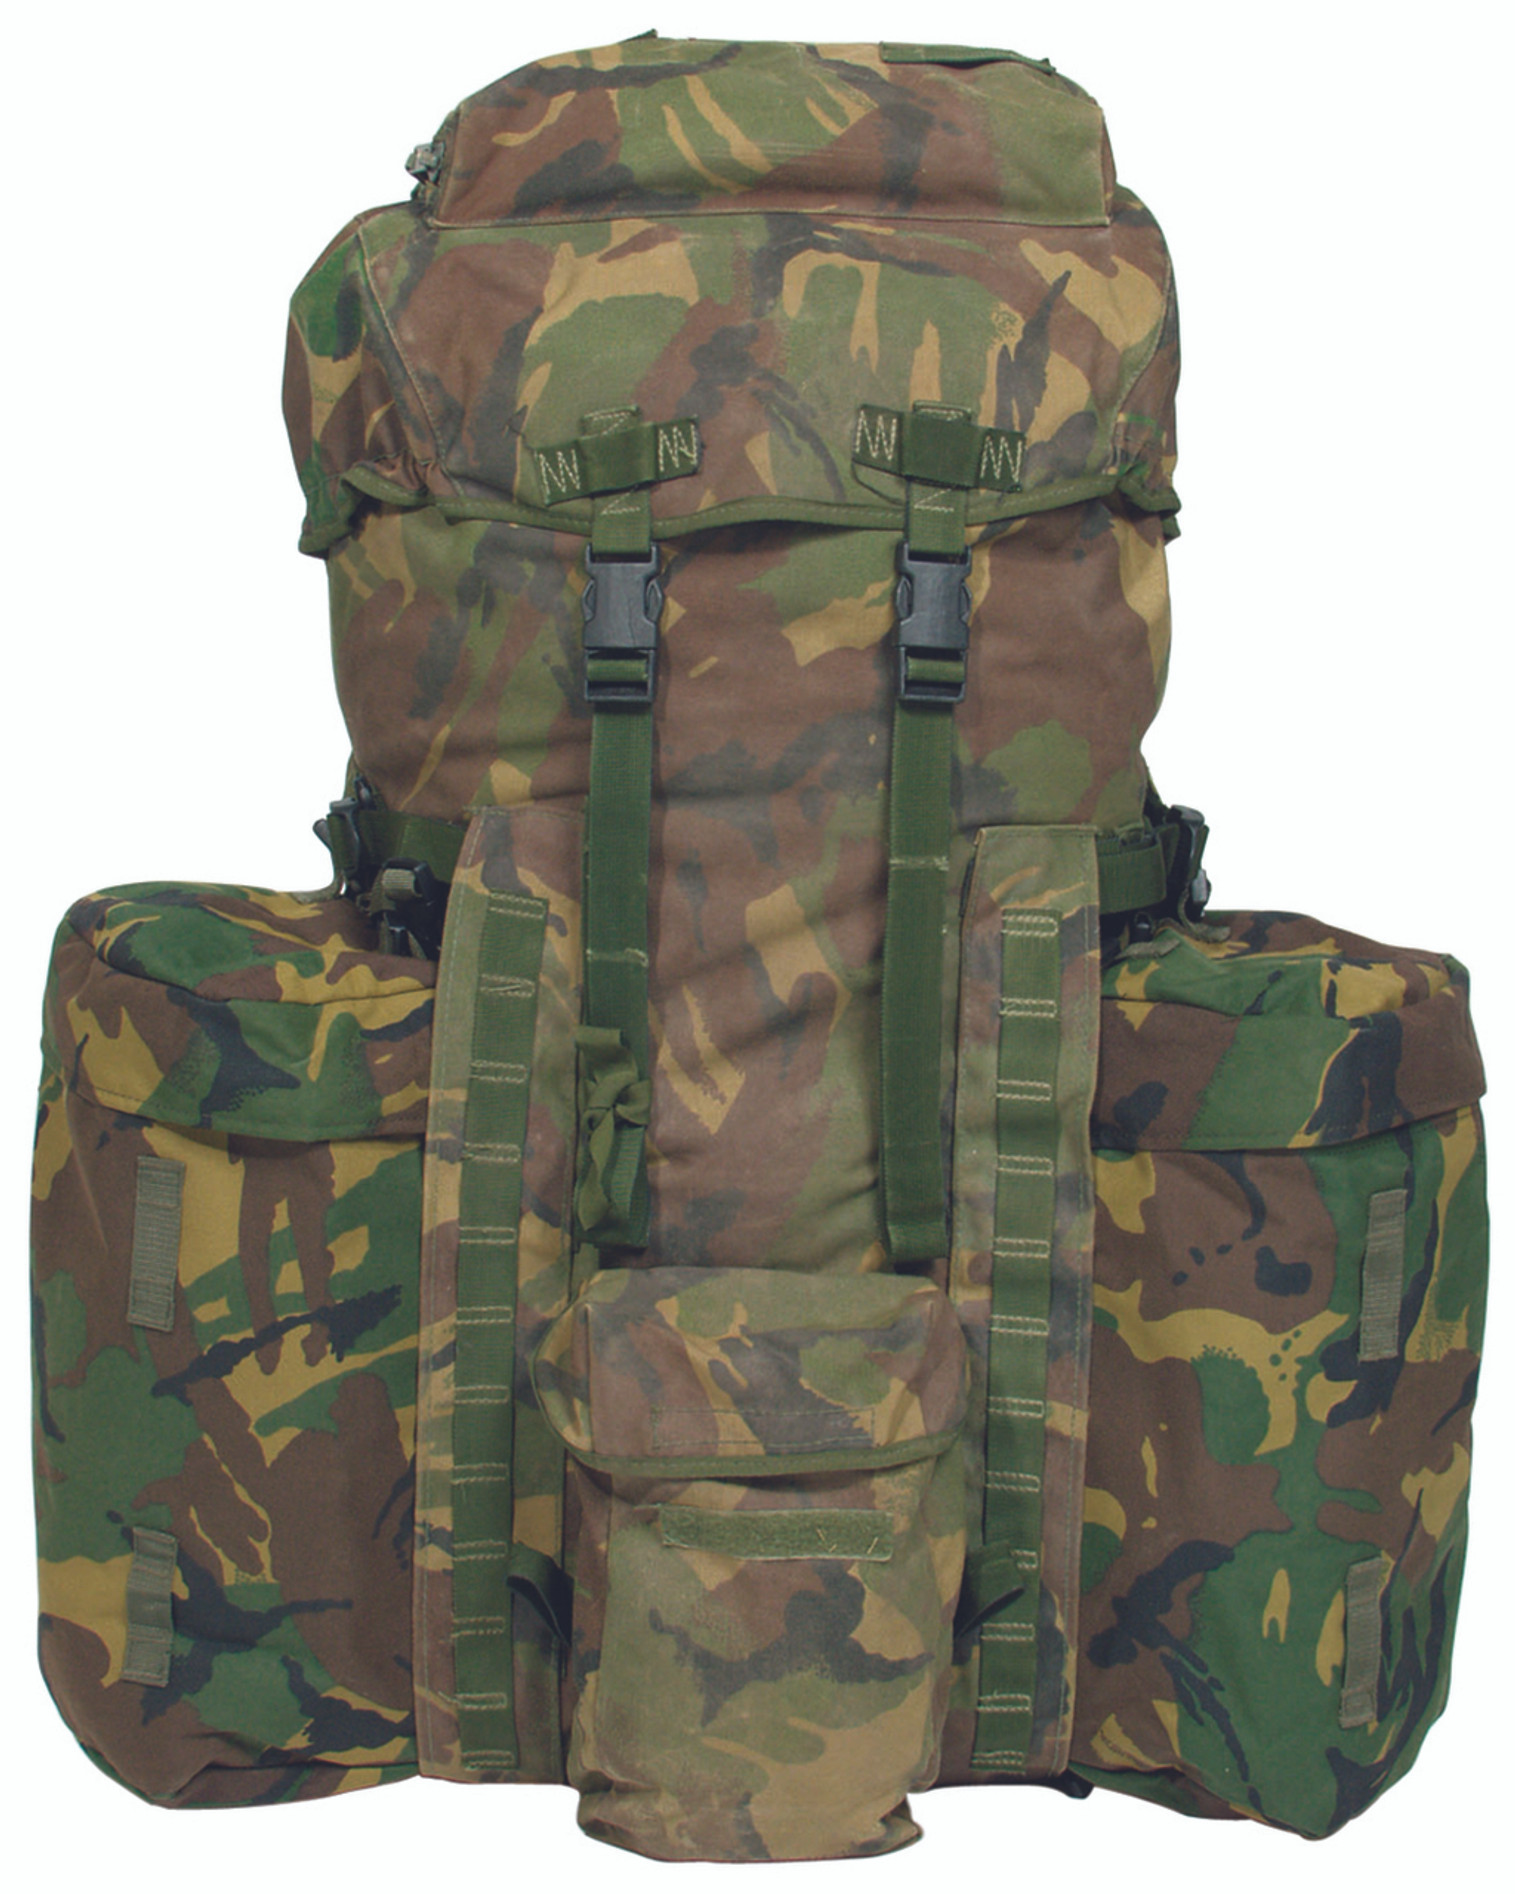 British Armed Forces PLCE Bergen DPM  Camo Rucksack - AS IS